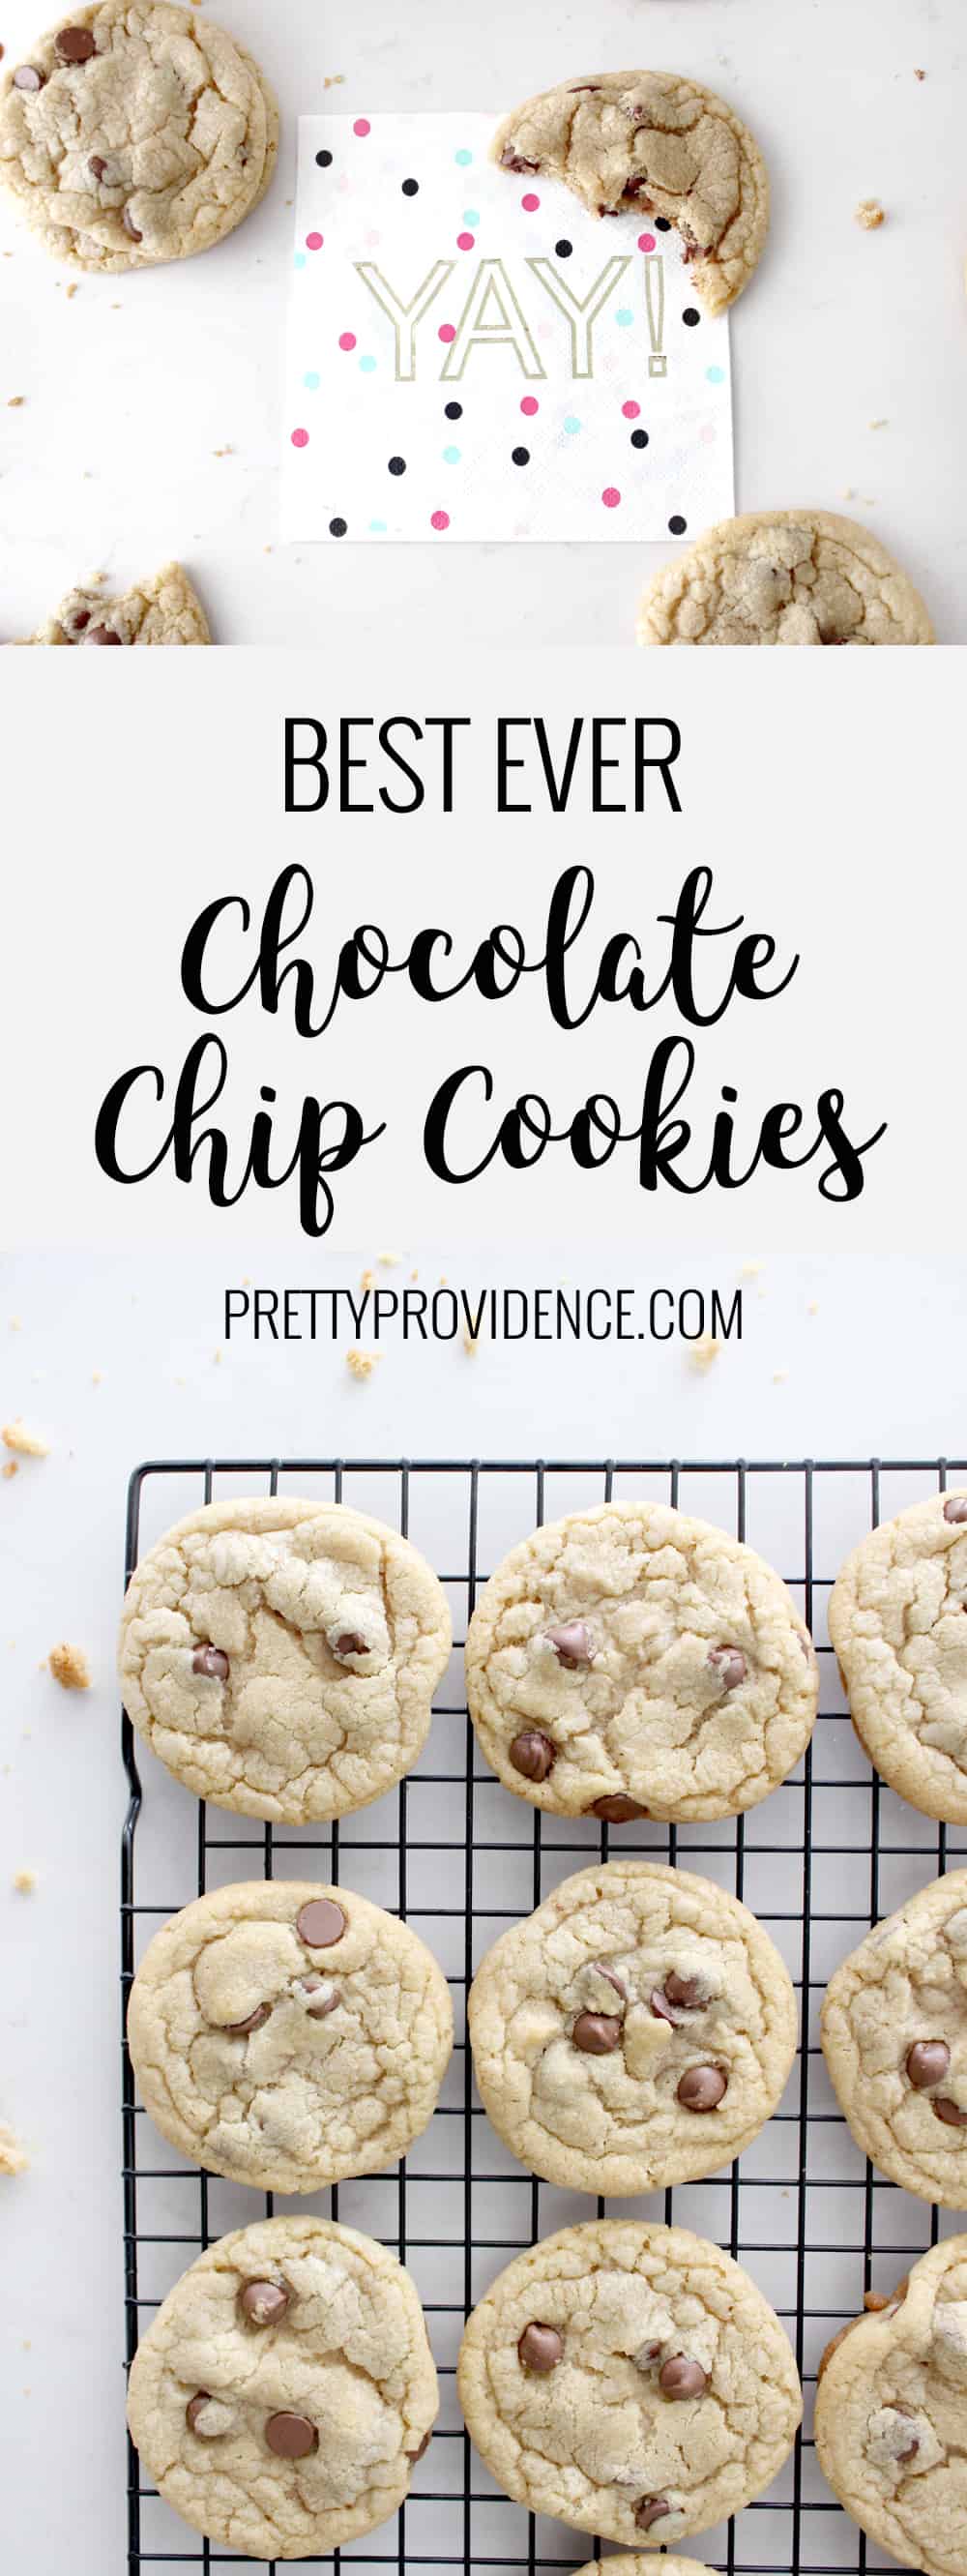 You only need one chocolate chip cookie recipe in your life and this is the one! Literally best ever chocolate chip cookies! You will not regret saving this one. 